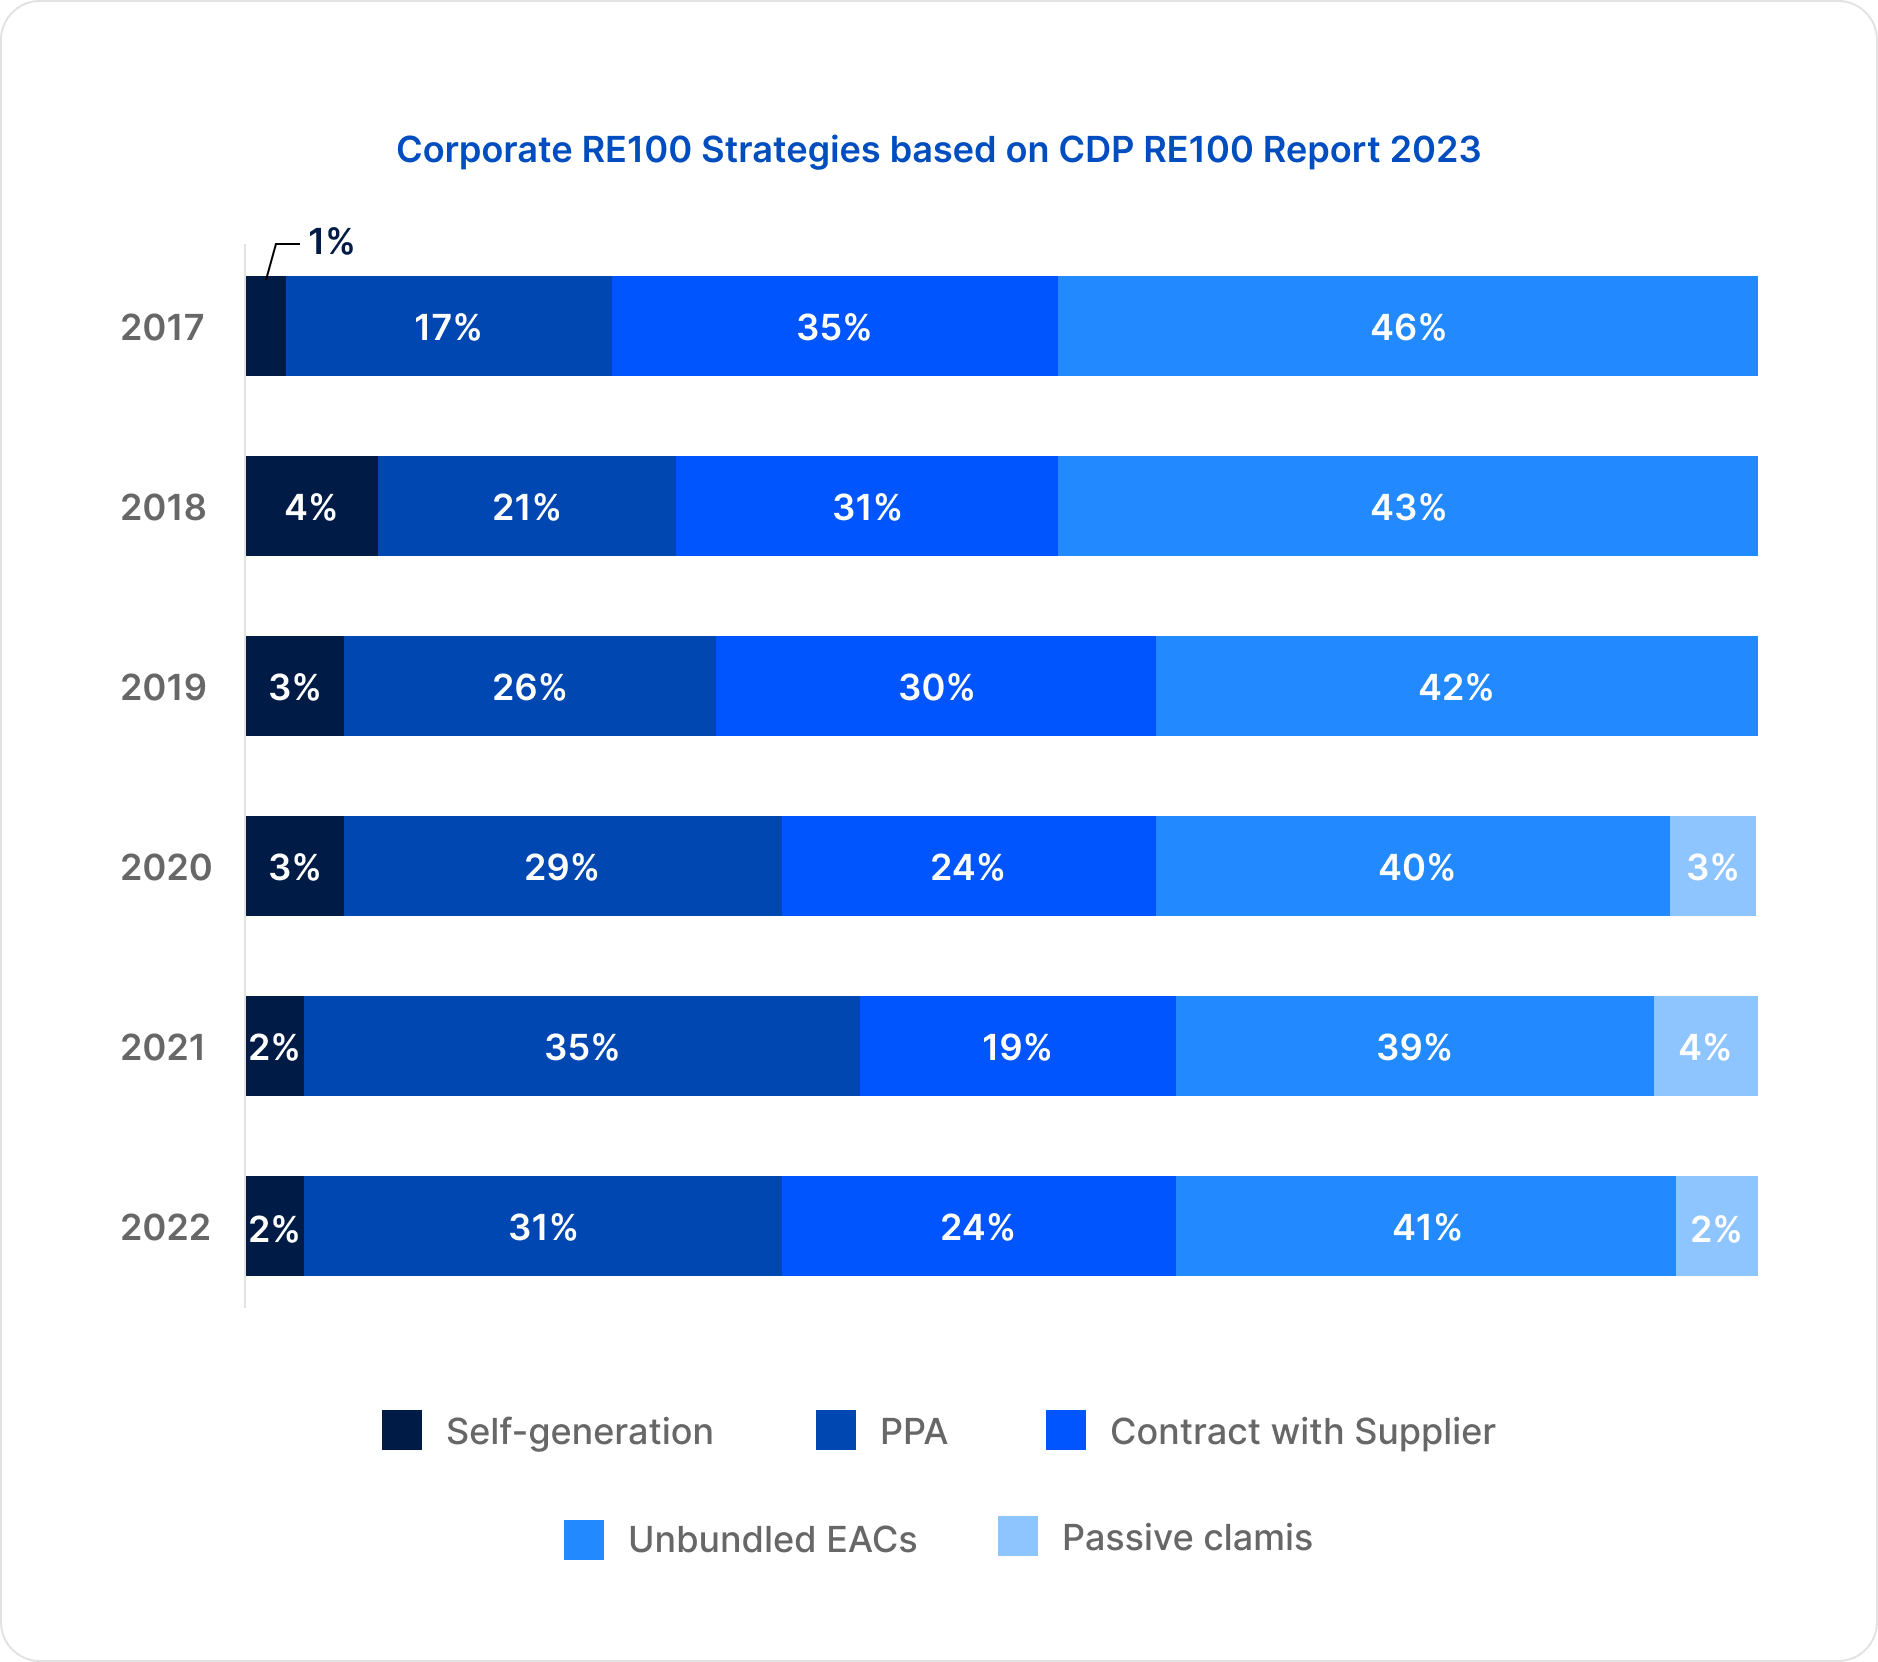 Corporate RE100 Strategies based on CDP RE100 Report 2023